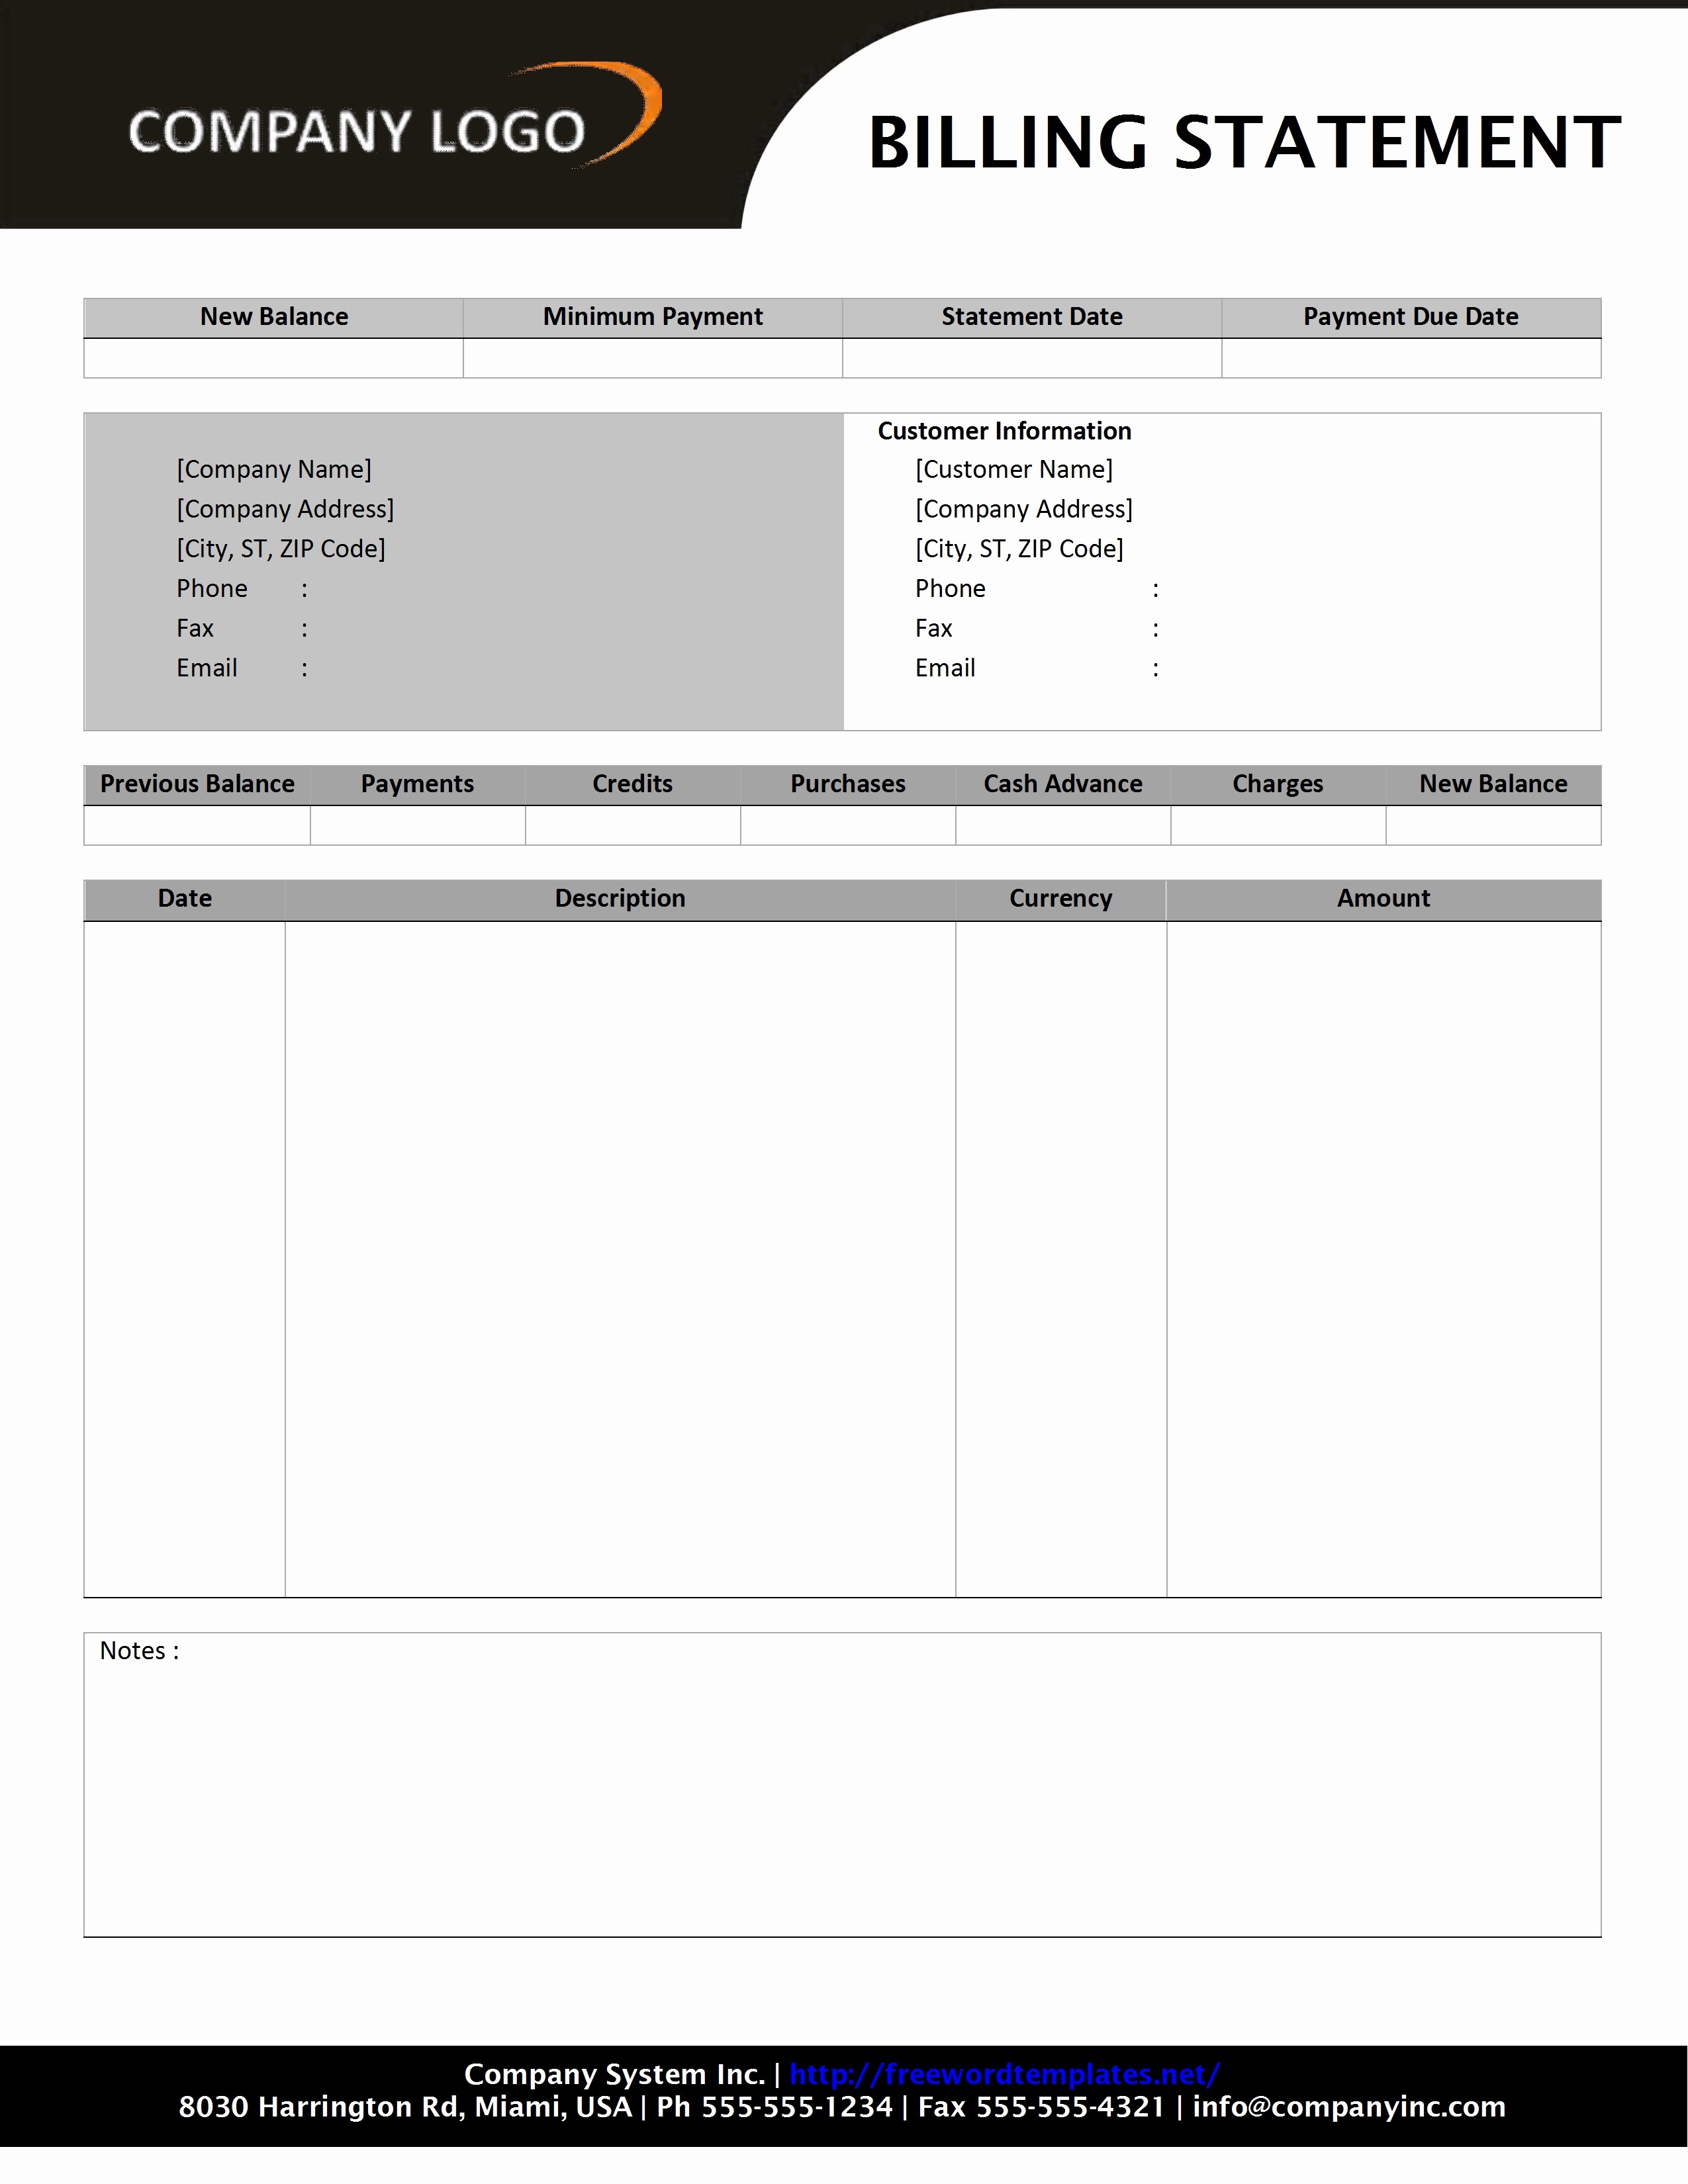 Statement Templates for Microsoft Word Inspirational Billing Statement Template